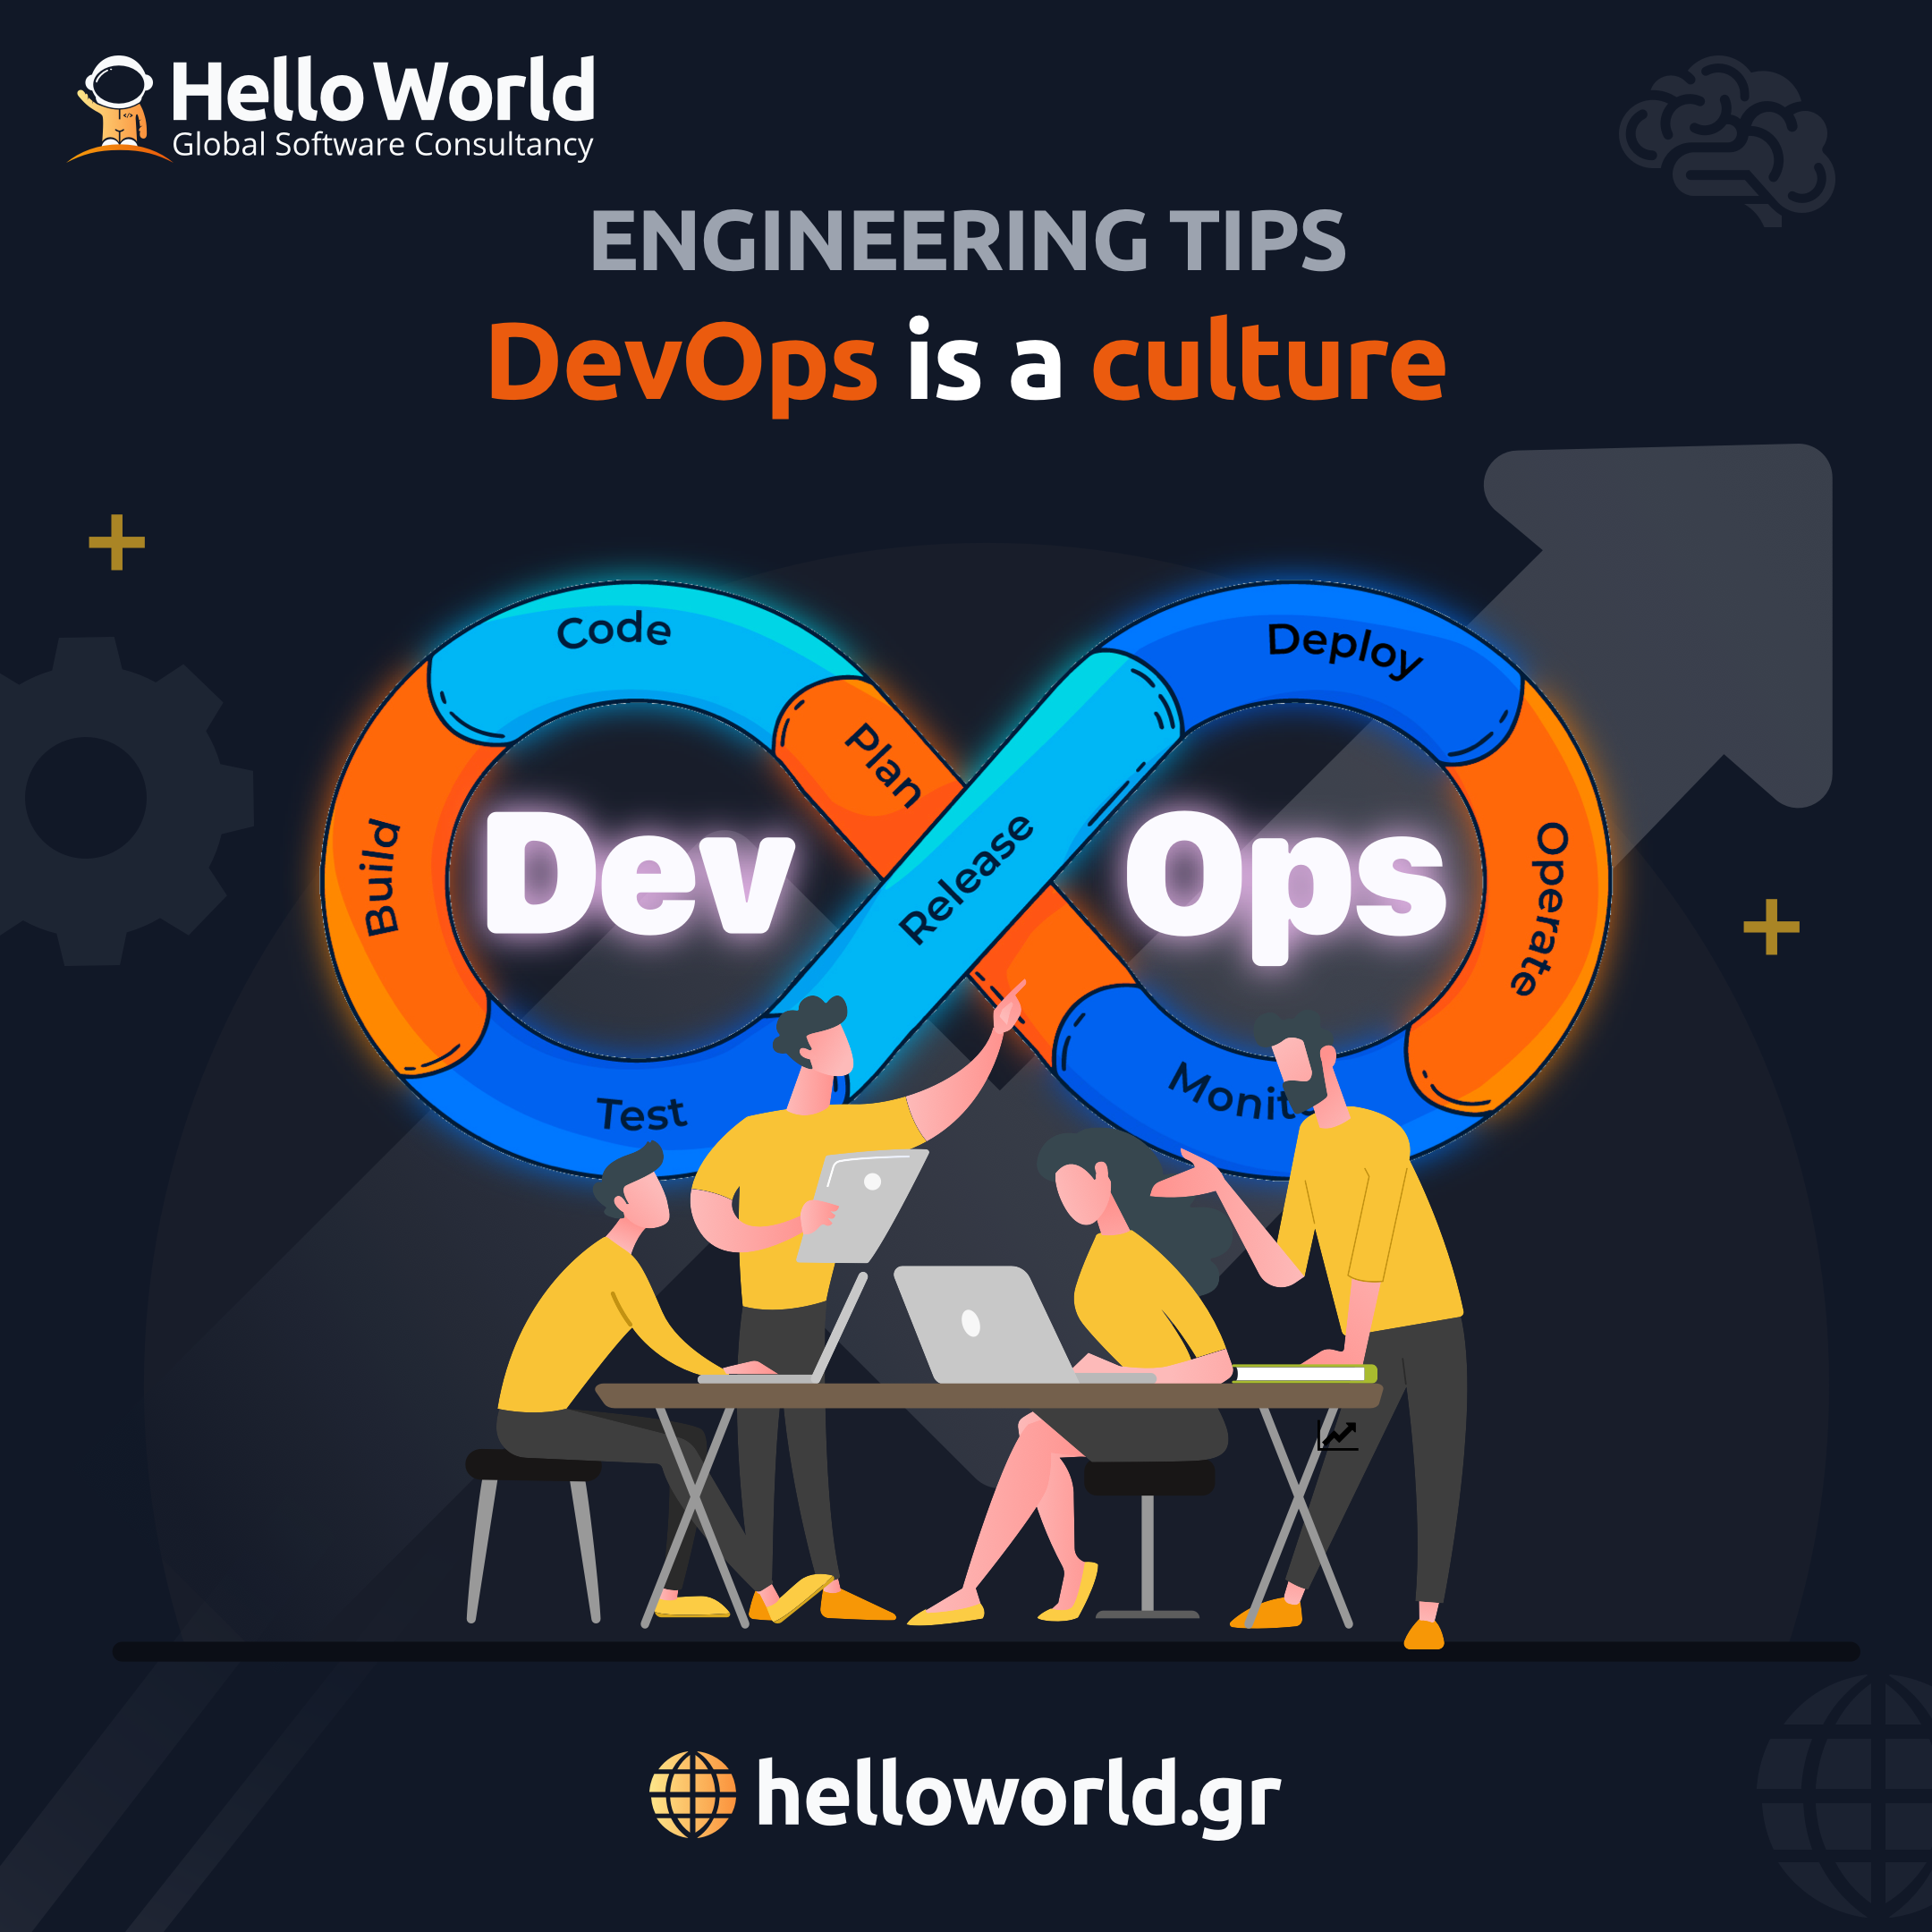 DevOps is a culture